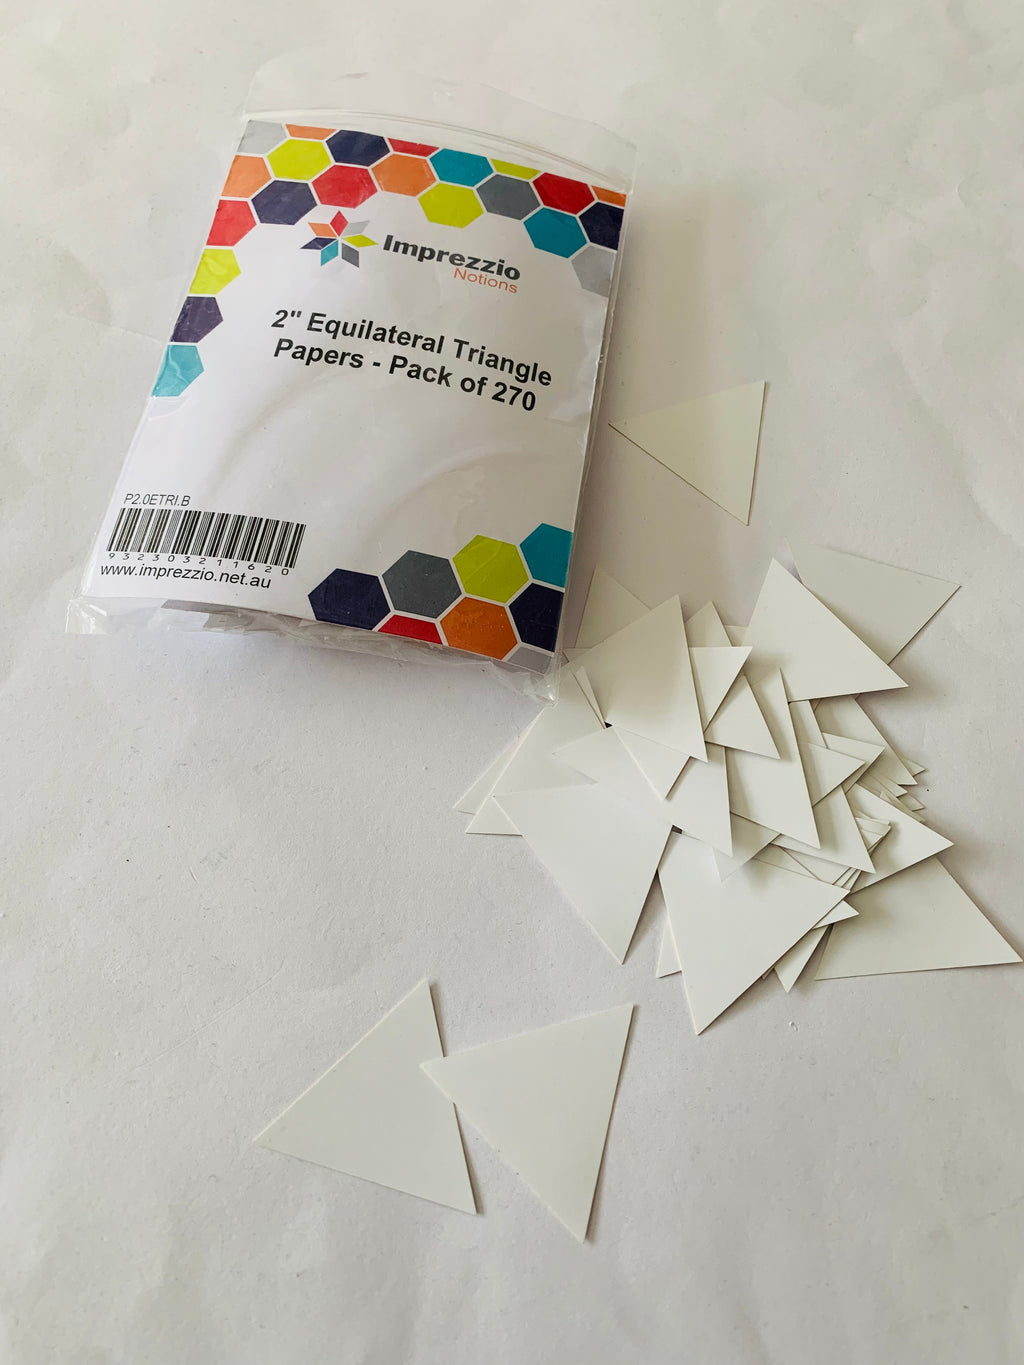 BULK PACK/ 2” Equilateral Triangle Papers Pack of 270